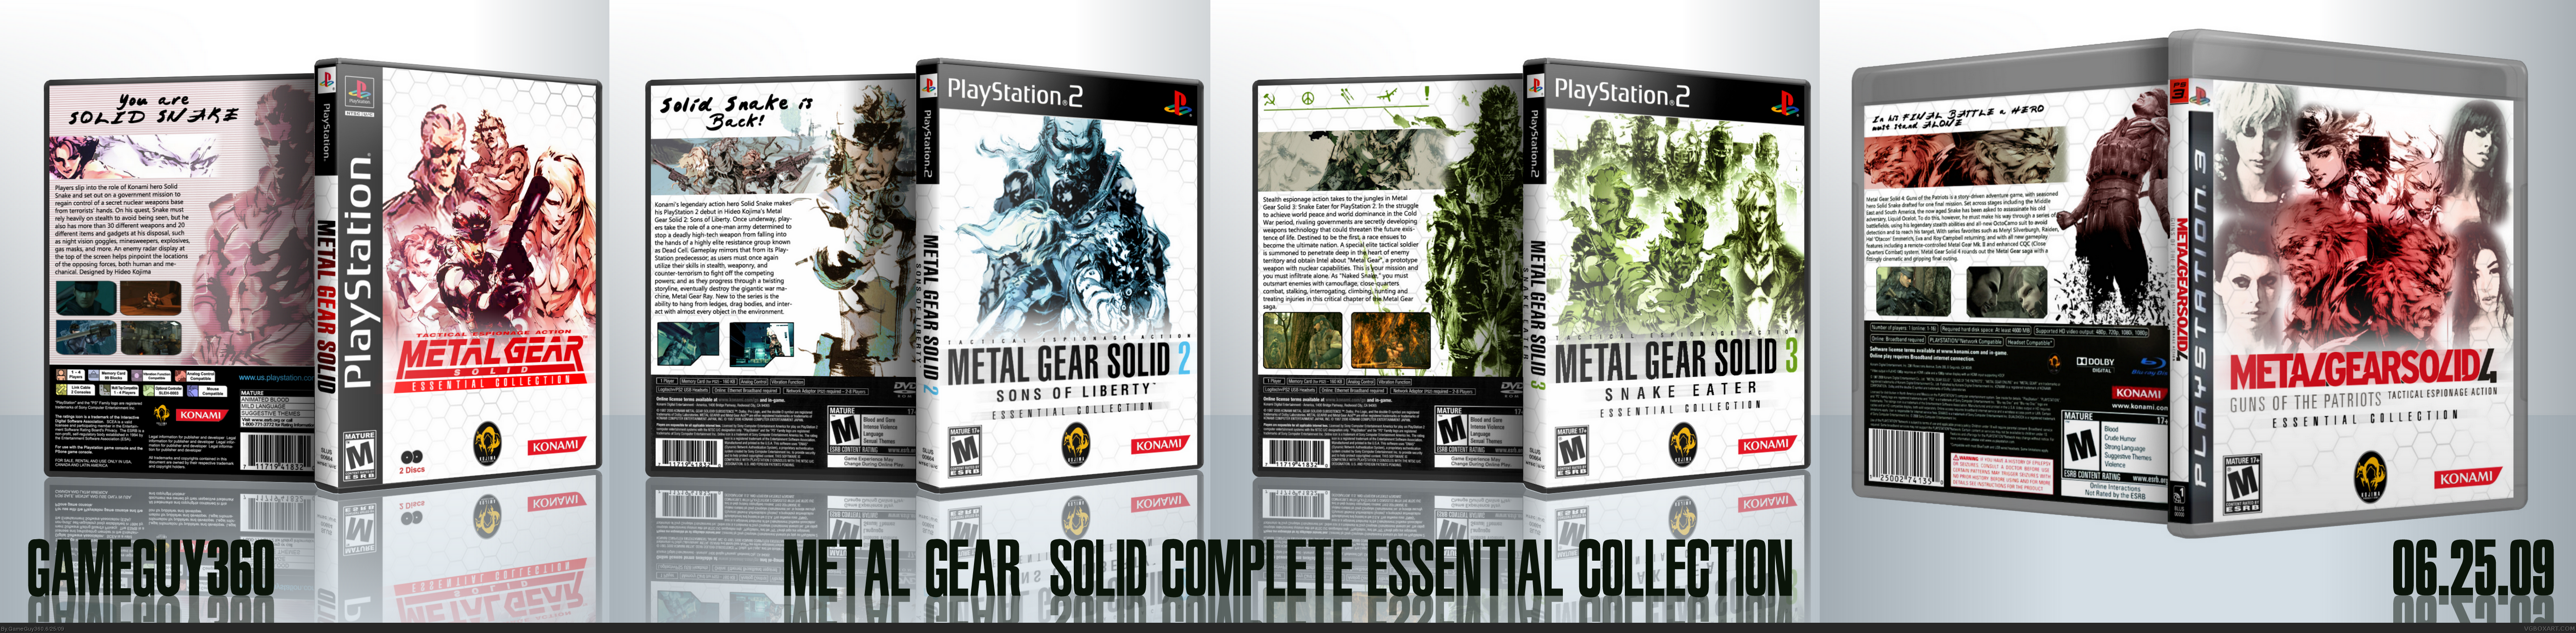 Metal Gear Solid: Complete Essential Collection box cover